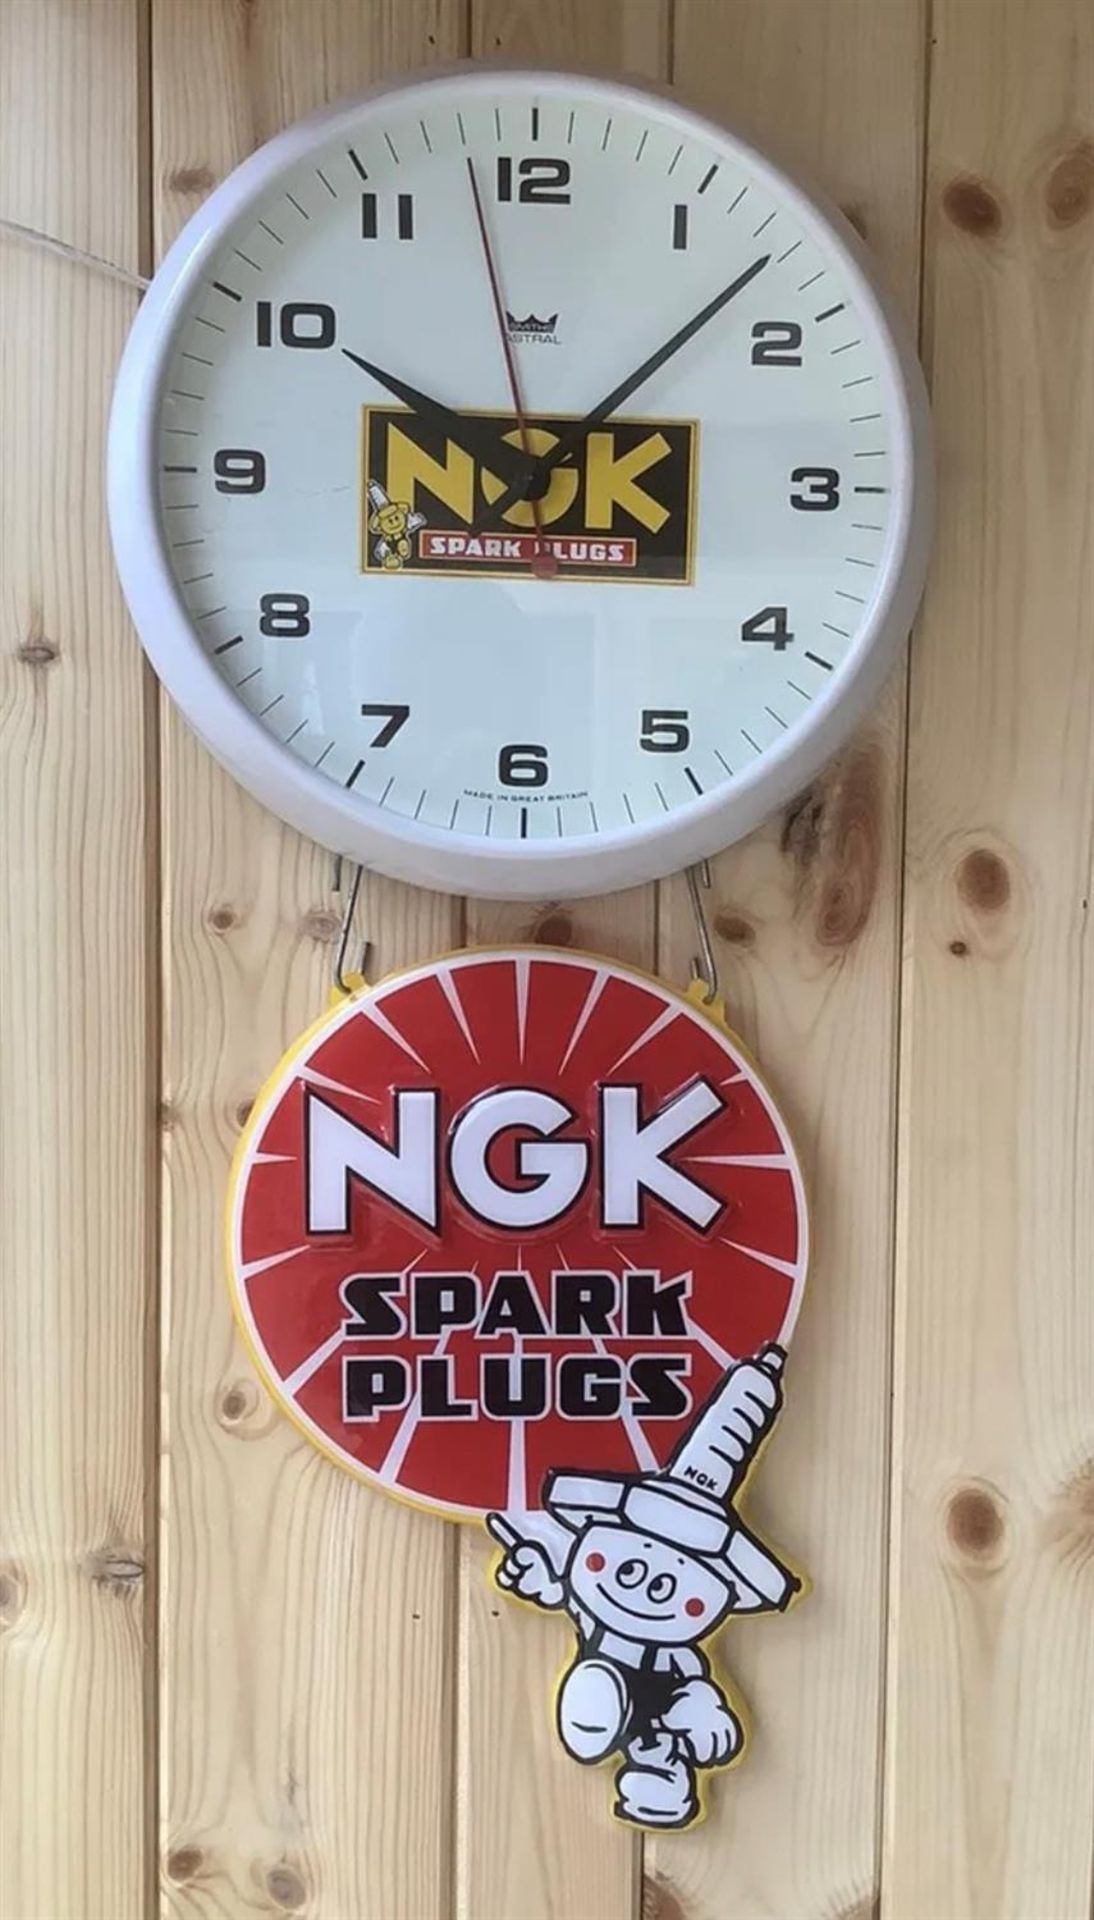 A Rare, NGK Spark Plugs, 14" Smiths Astral Dial Clock - Image 2 of 10